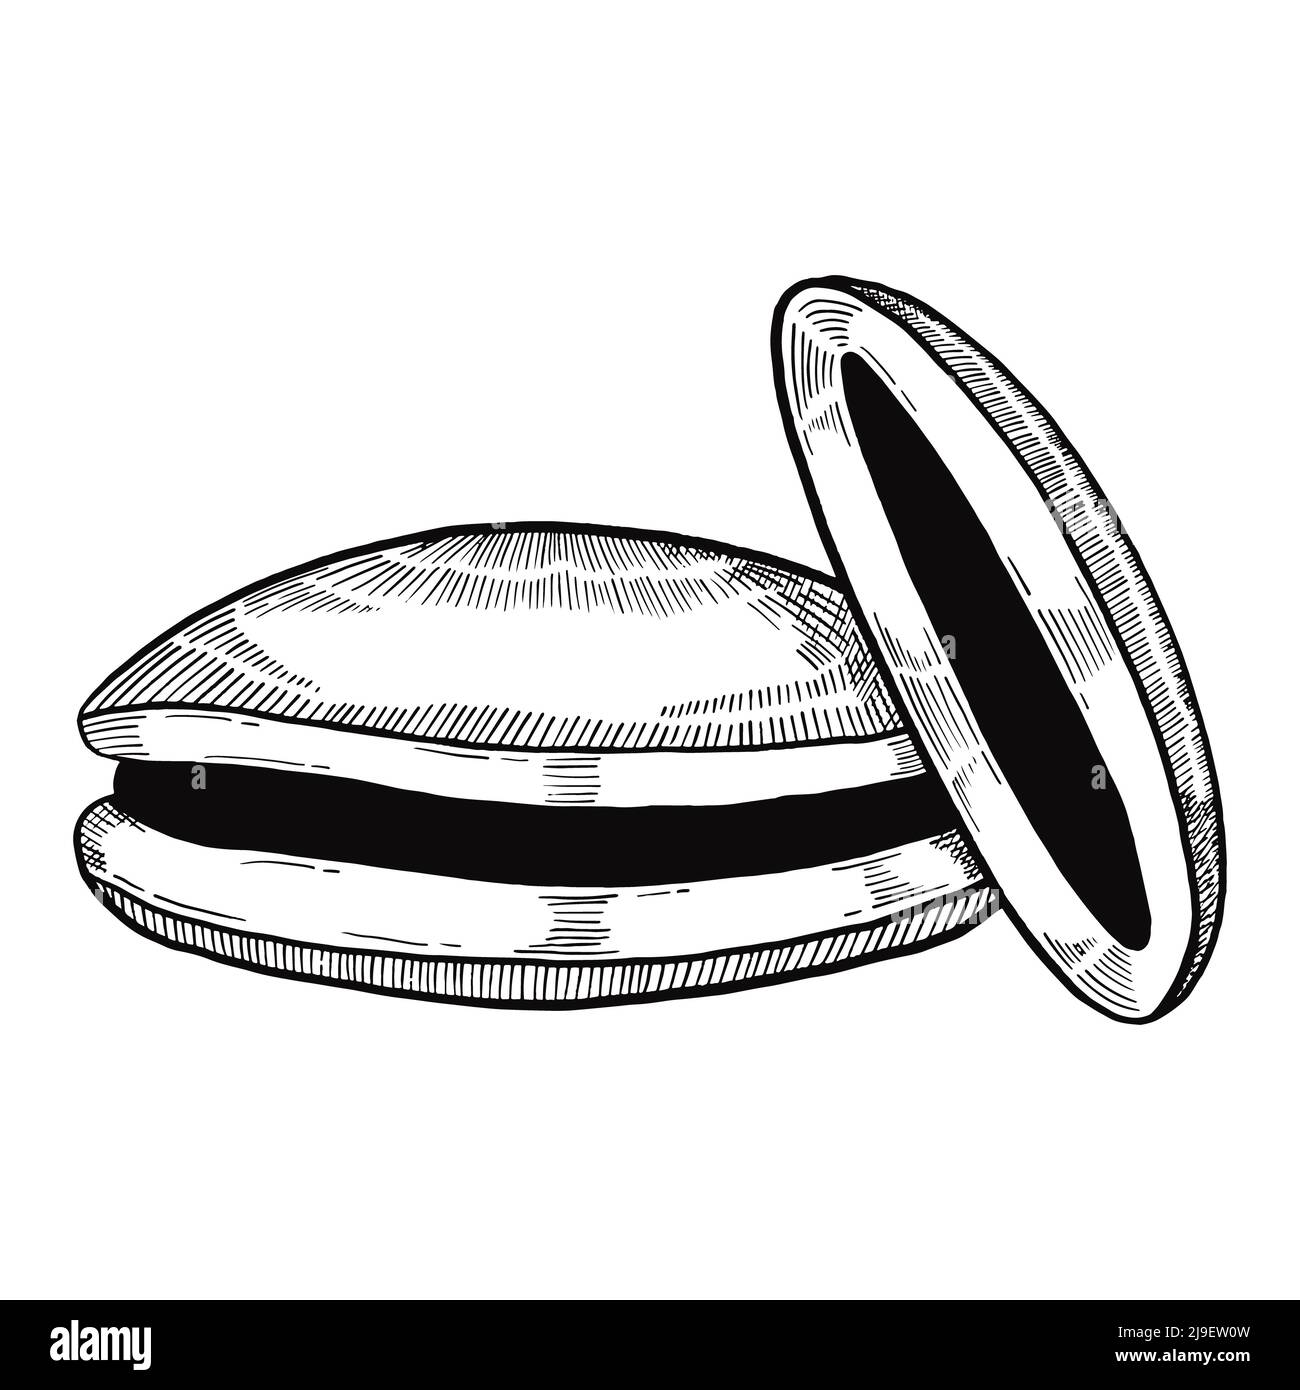 dorayaki japan or japanese traditional food doodle hand drawn sketch with outline style vector illustration Stock Photo